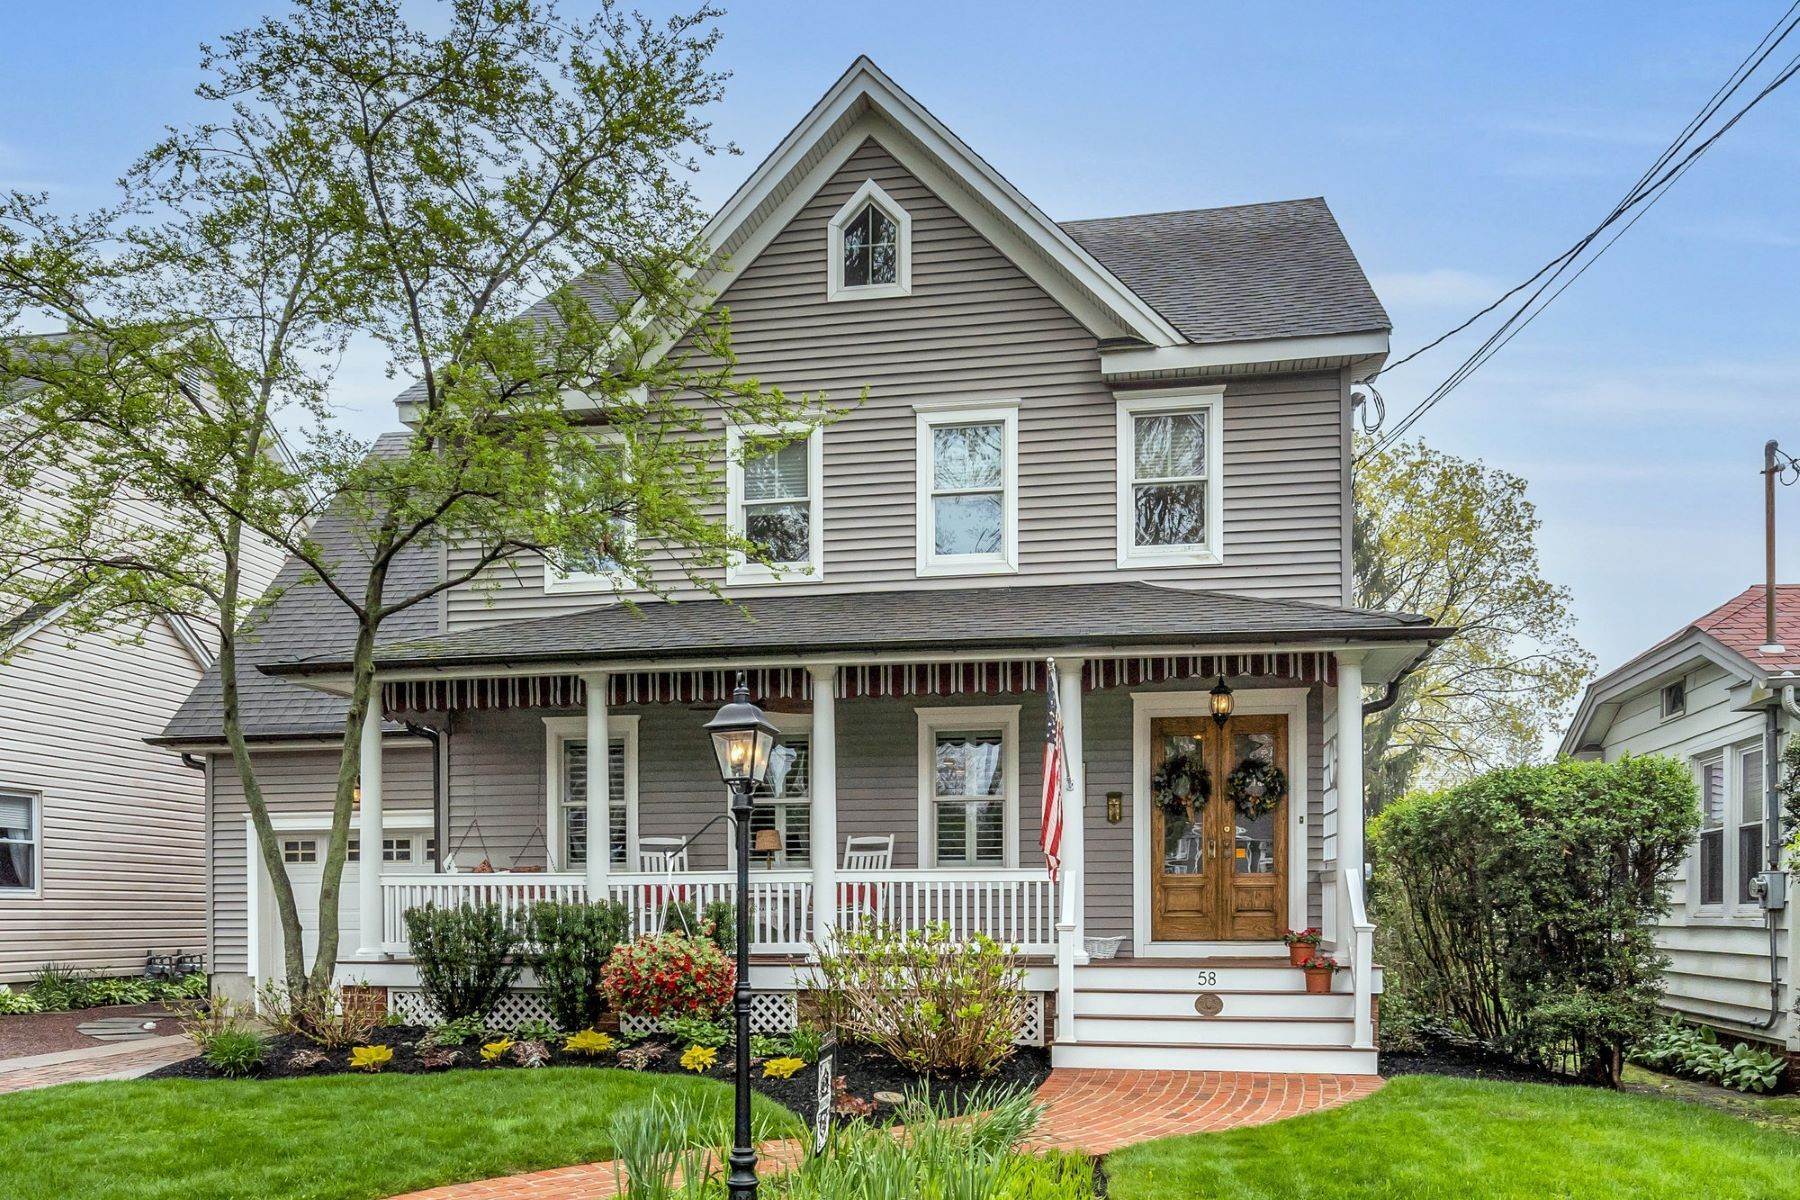 Single Family Homes for Sale at Charming Custom Colonial 58 Morris Avenue Manasquan, New Jersey 08736 United States